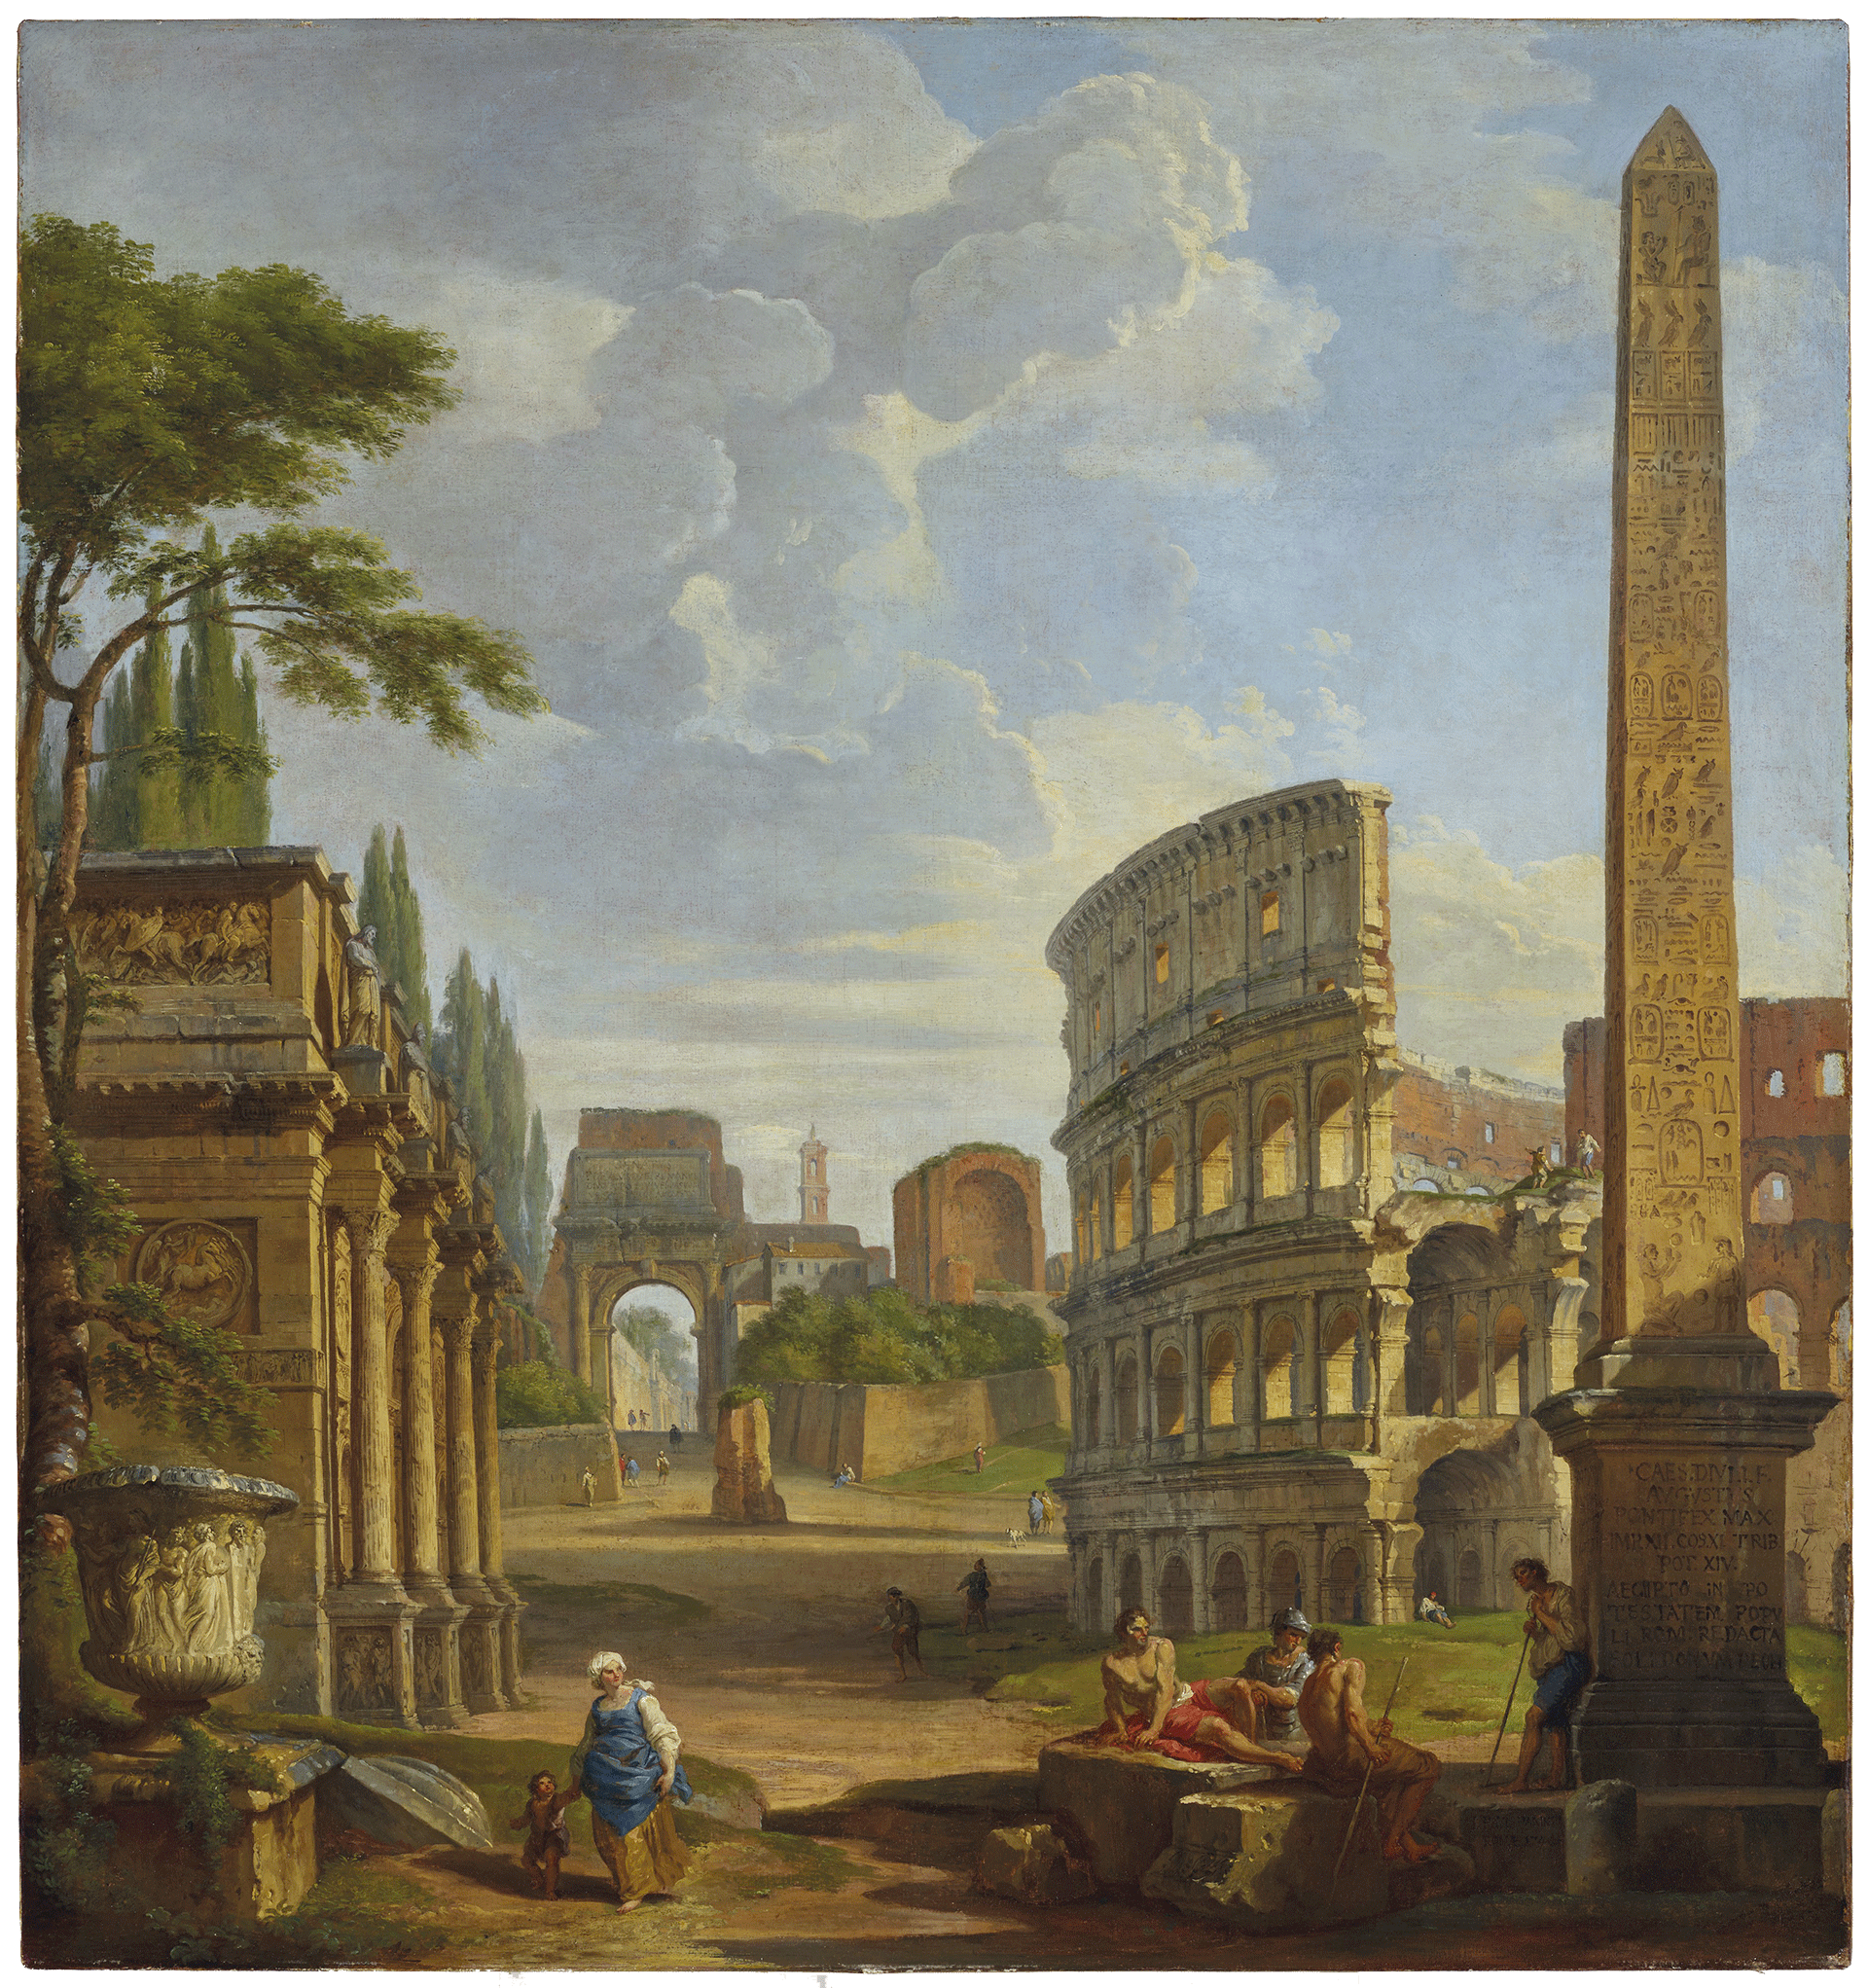 A capriccio view of the Forum, Rome, with the Arch of Costantine, the Arch of Titus, the Palazzo Senatorio, the Meta Sudans, the Temple of Venus and Roma, the Colosseum and an obelisk